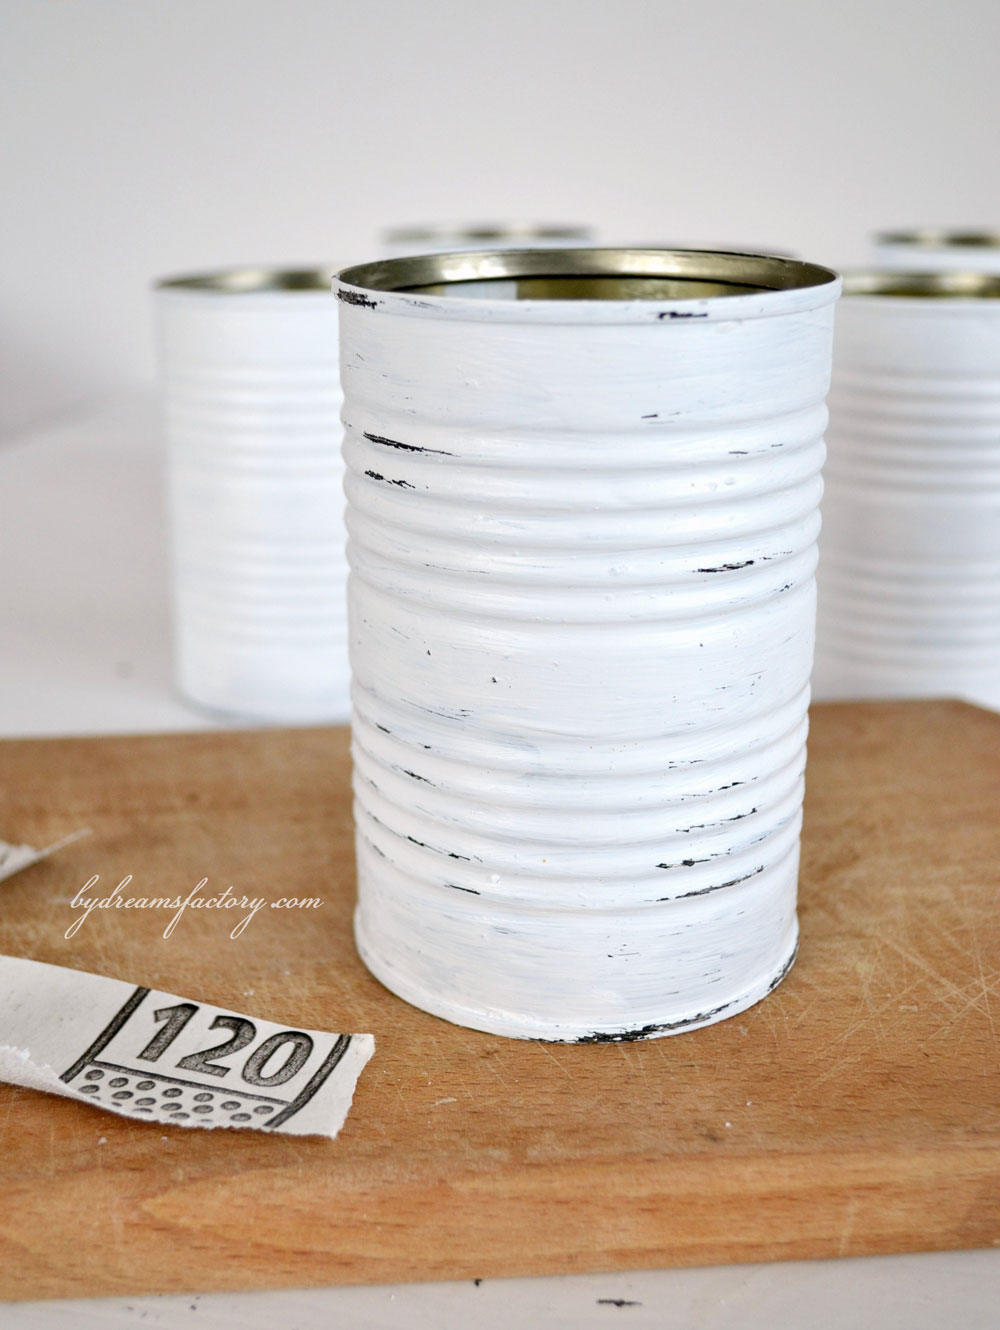 Learn how to make some amazing Shabby French recycled tin cans that you use all around your home. Get organized in a classy way! - Dreams Factory